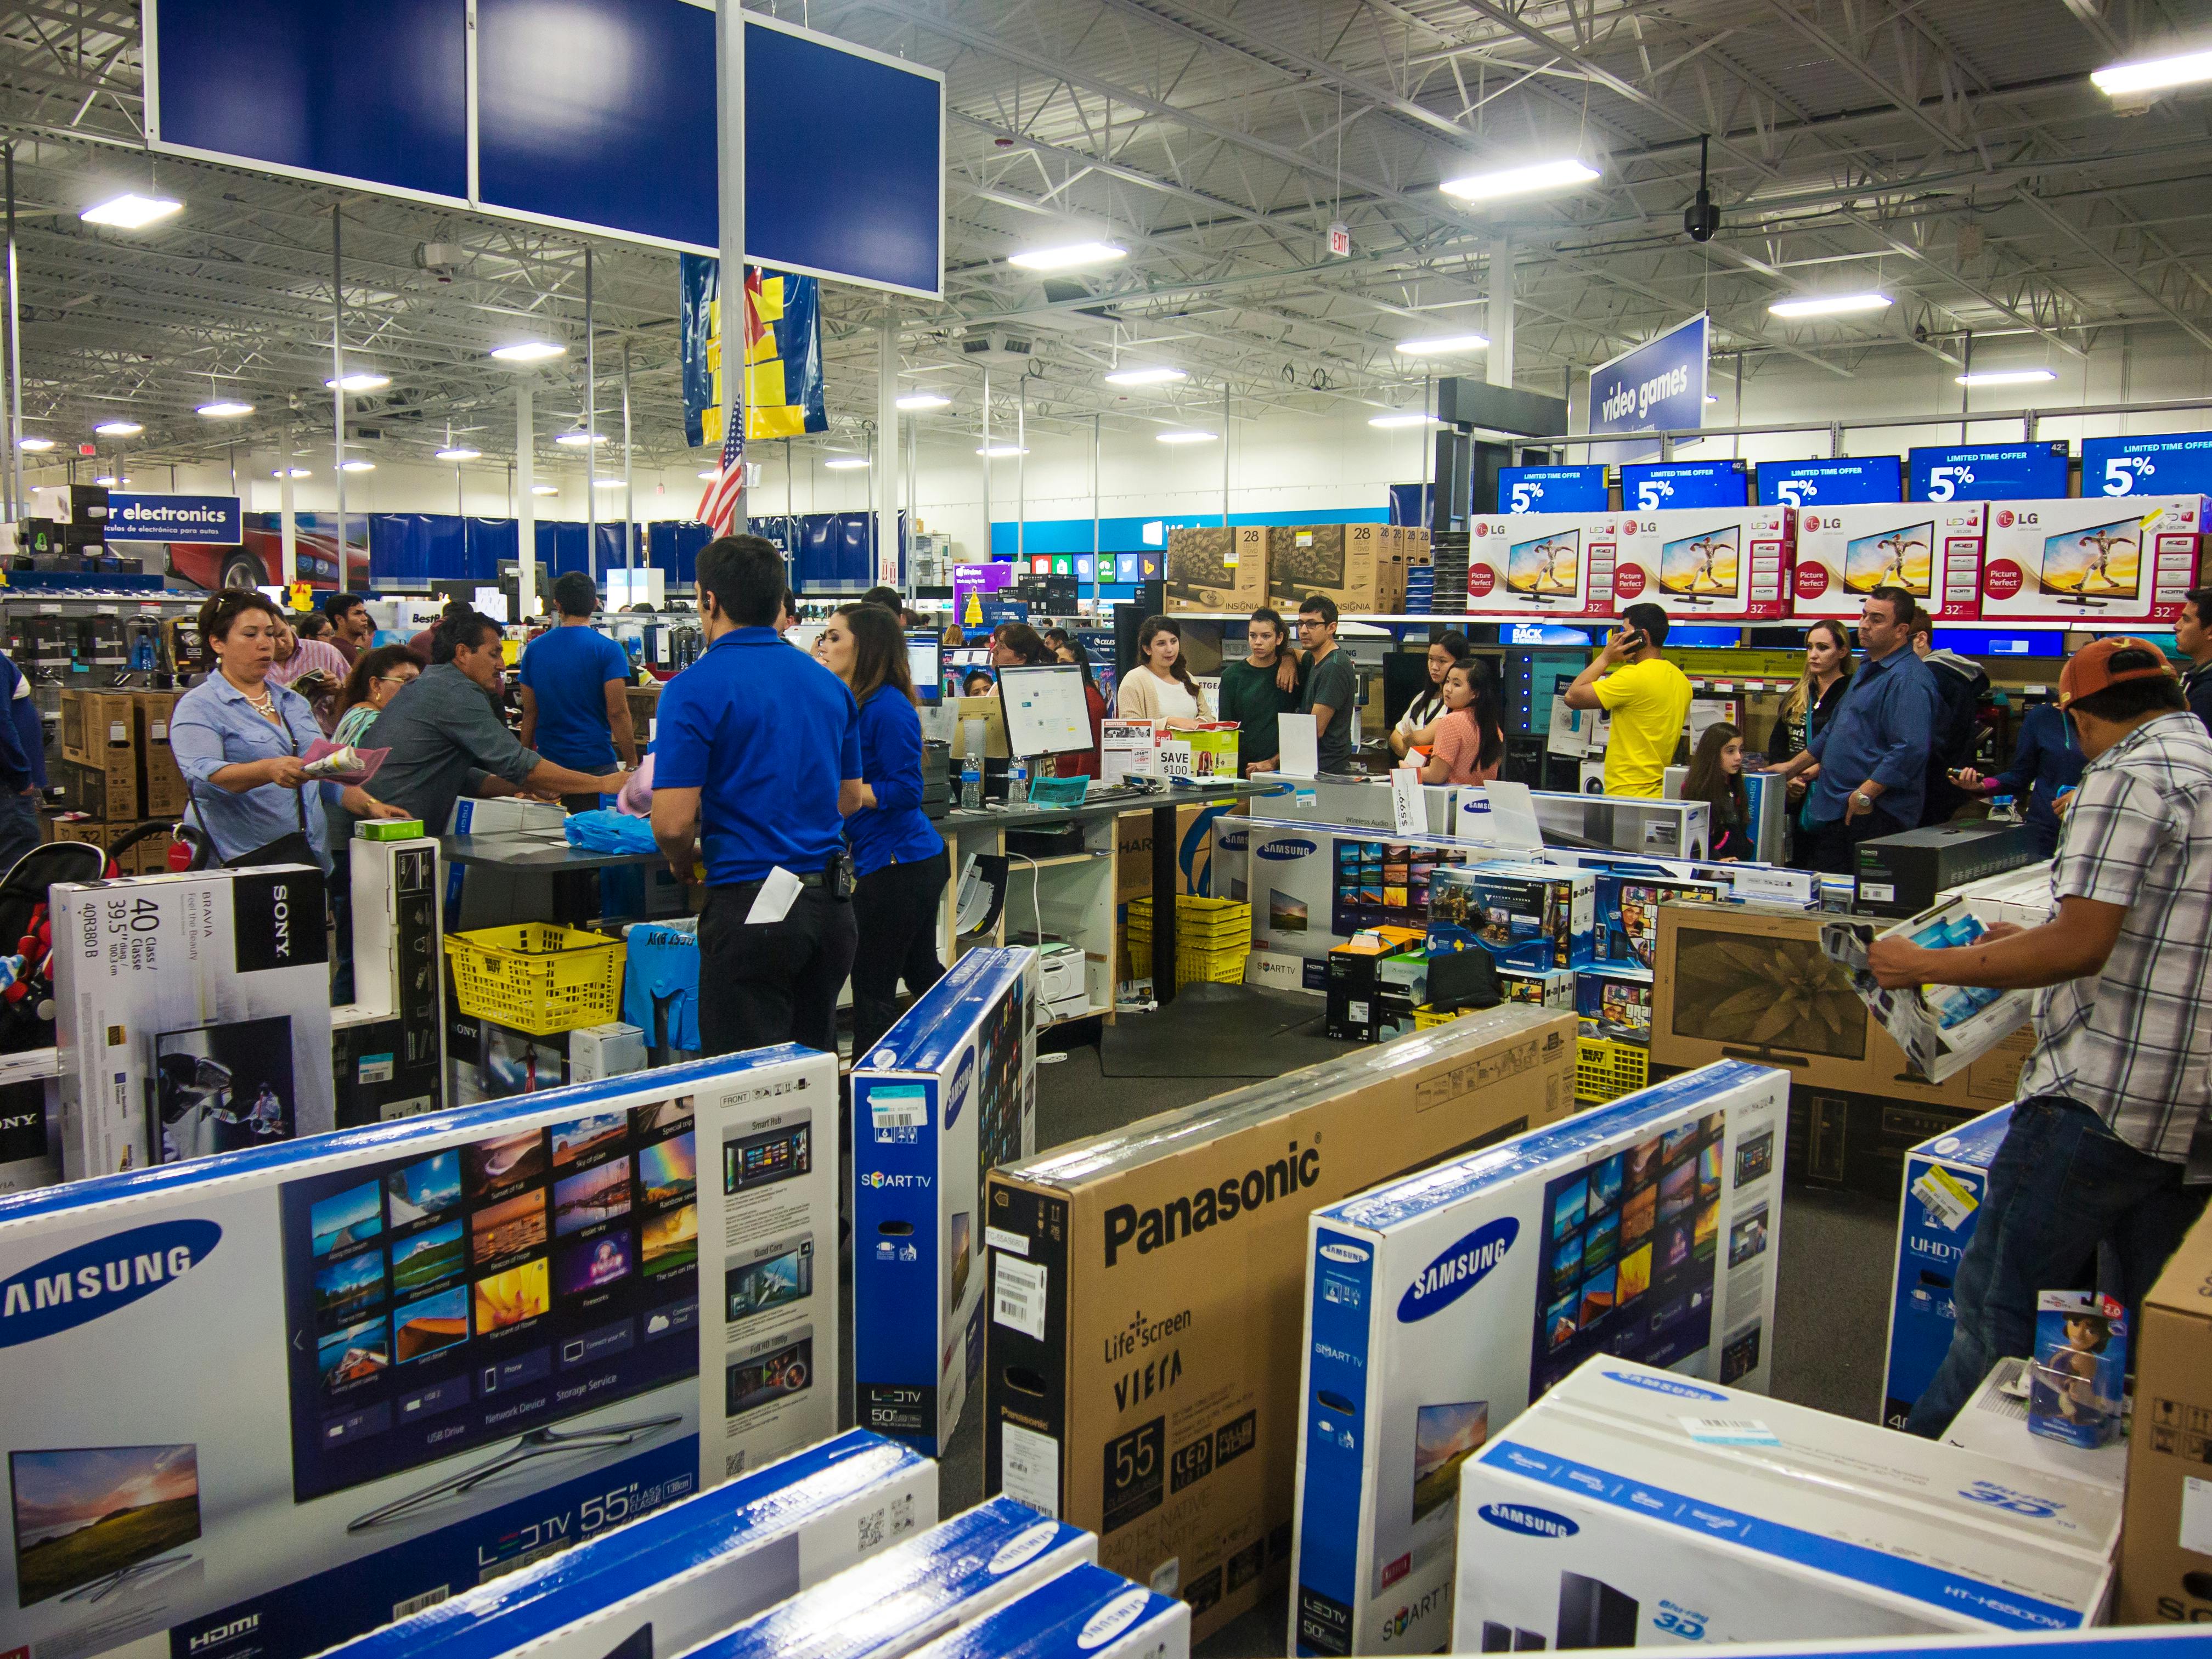 Lines of people buying TVs during Best Buy Black Friday